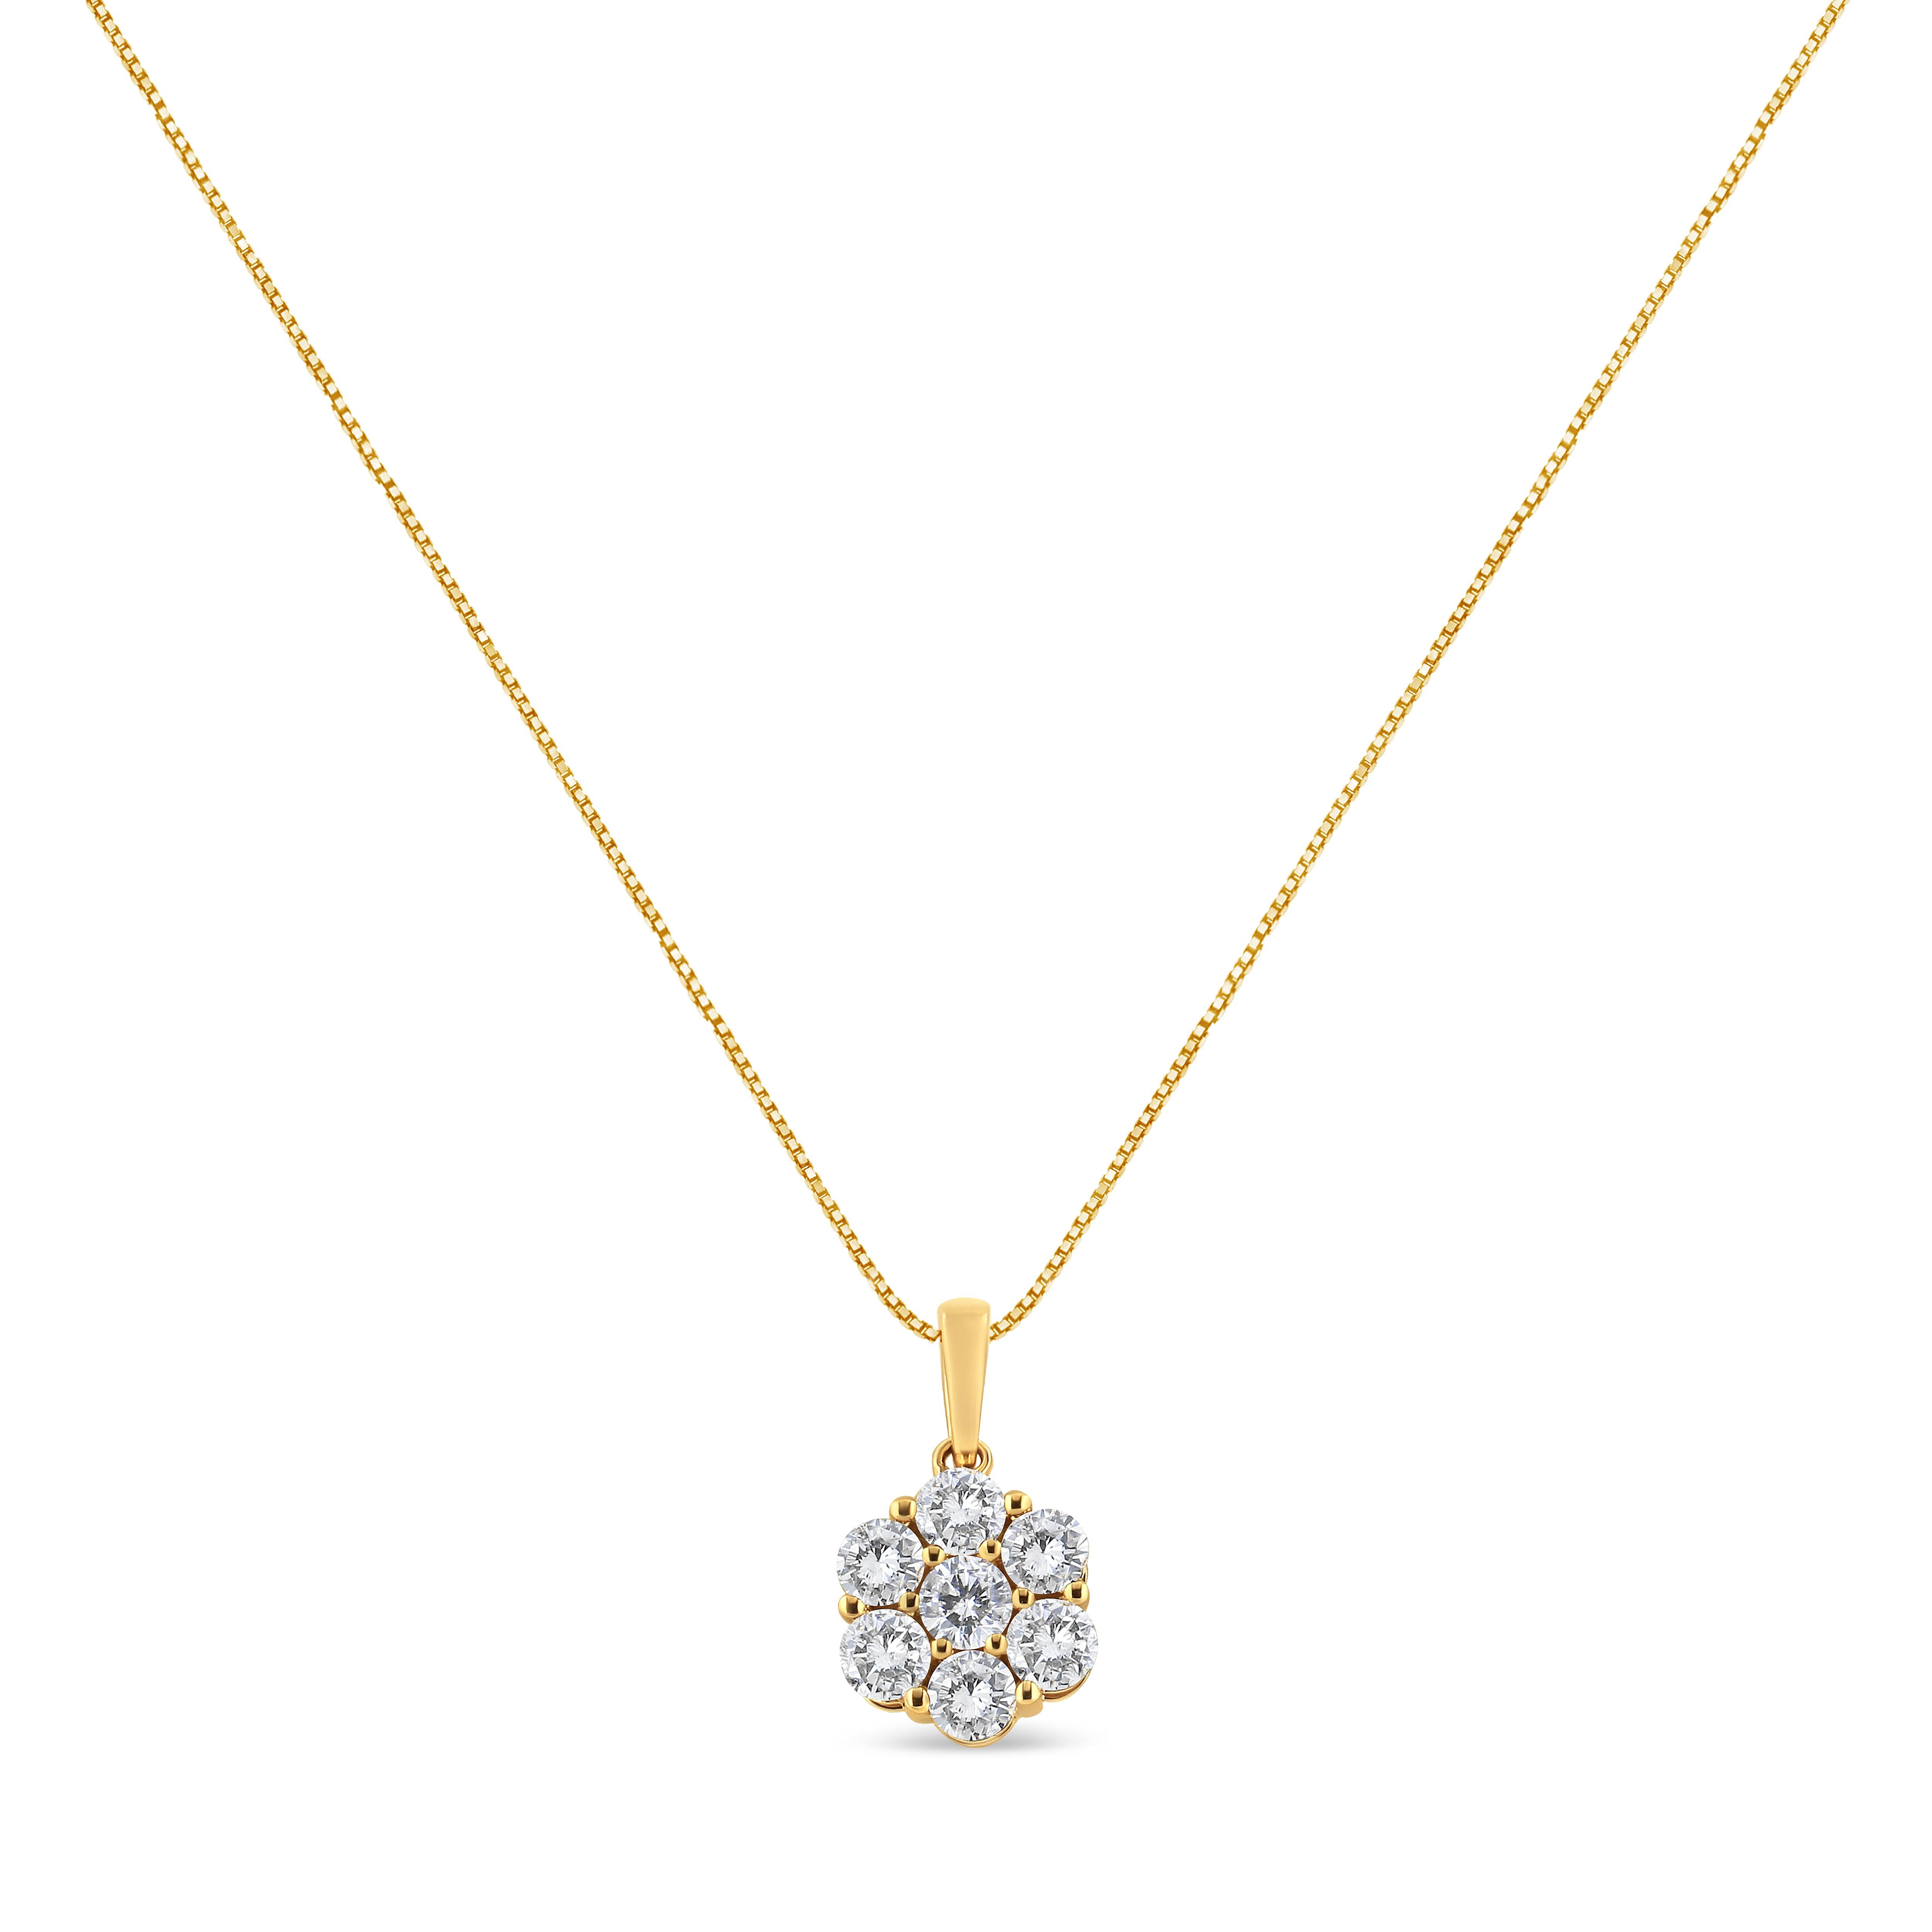 Add a floral touch to your everyday jewelry wear with this stunning 2 cttw diamond cluster pendant. This necklace boasts 7 natural, round-cut diamonds in a flower motif that is created in genuine 14k Yellow Gold. The pendant hangs off of a 14k